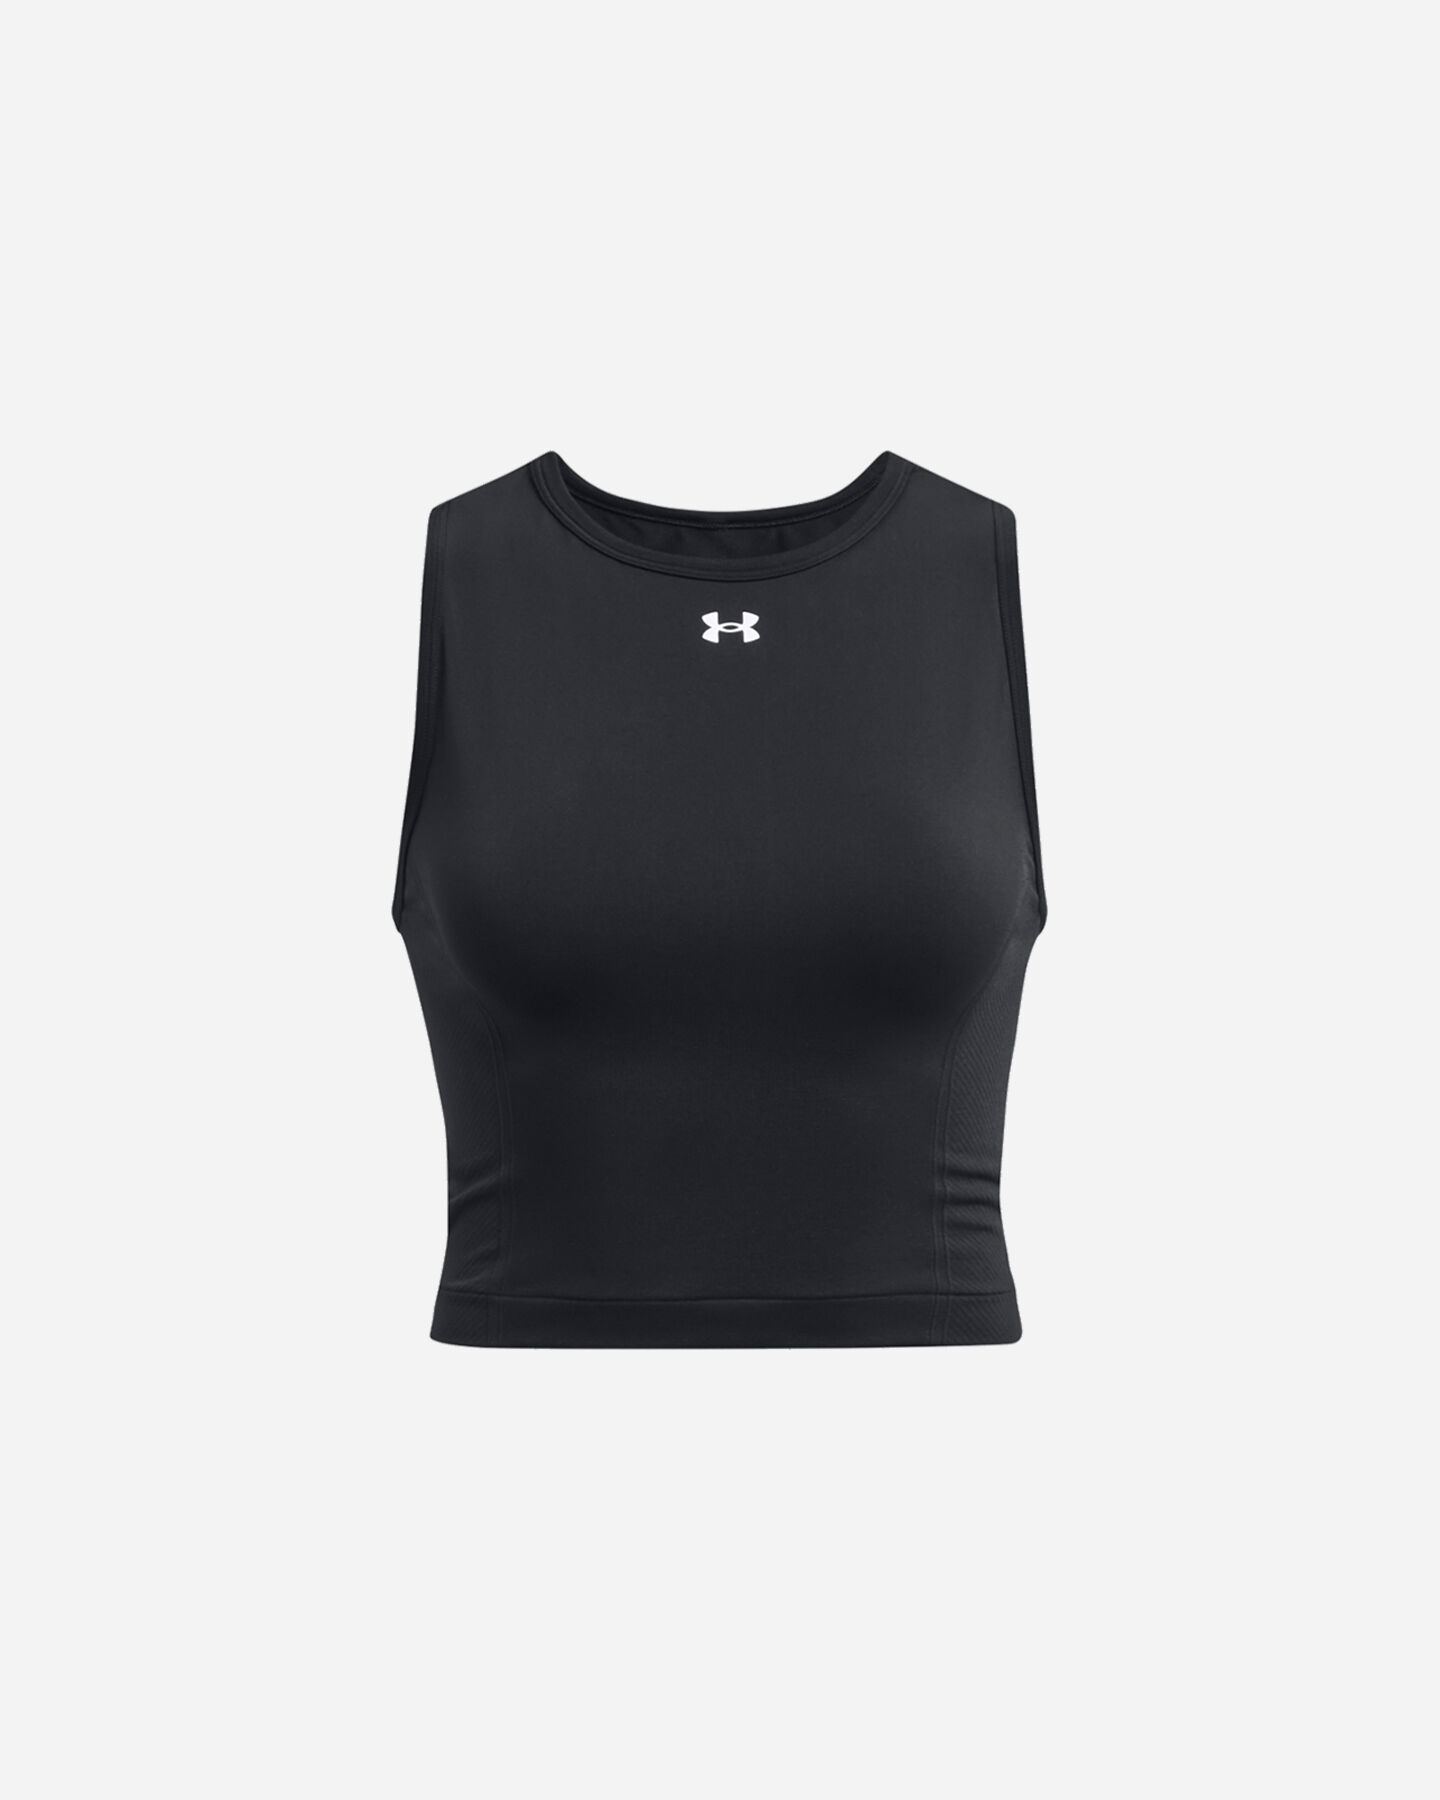  Canotta training UNDER ARMOUR SEAMLESS W S5579288|0001|XS scatto 0